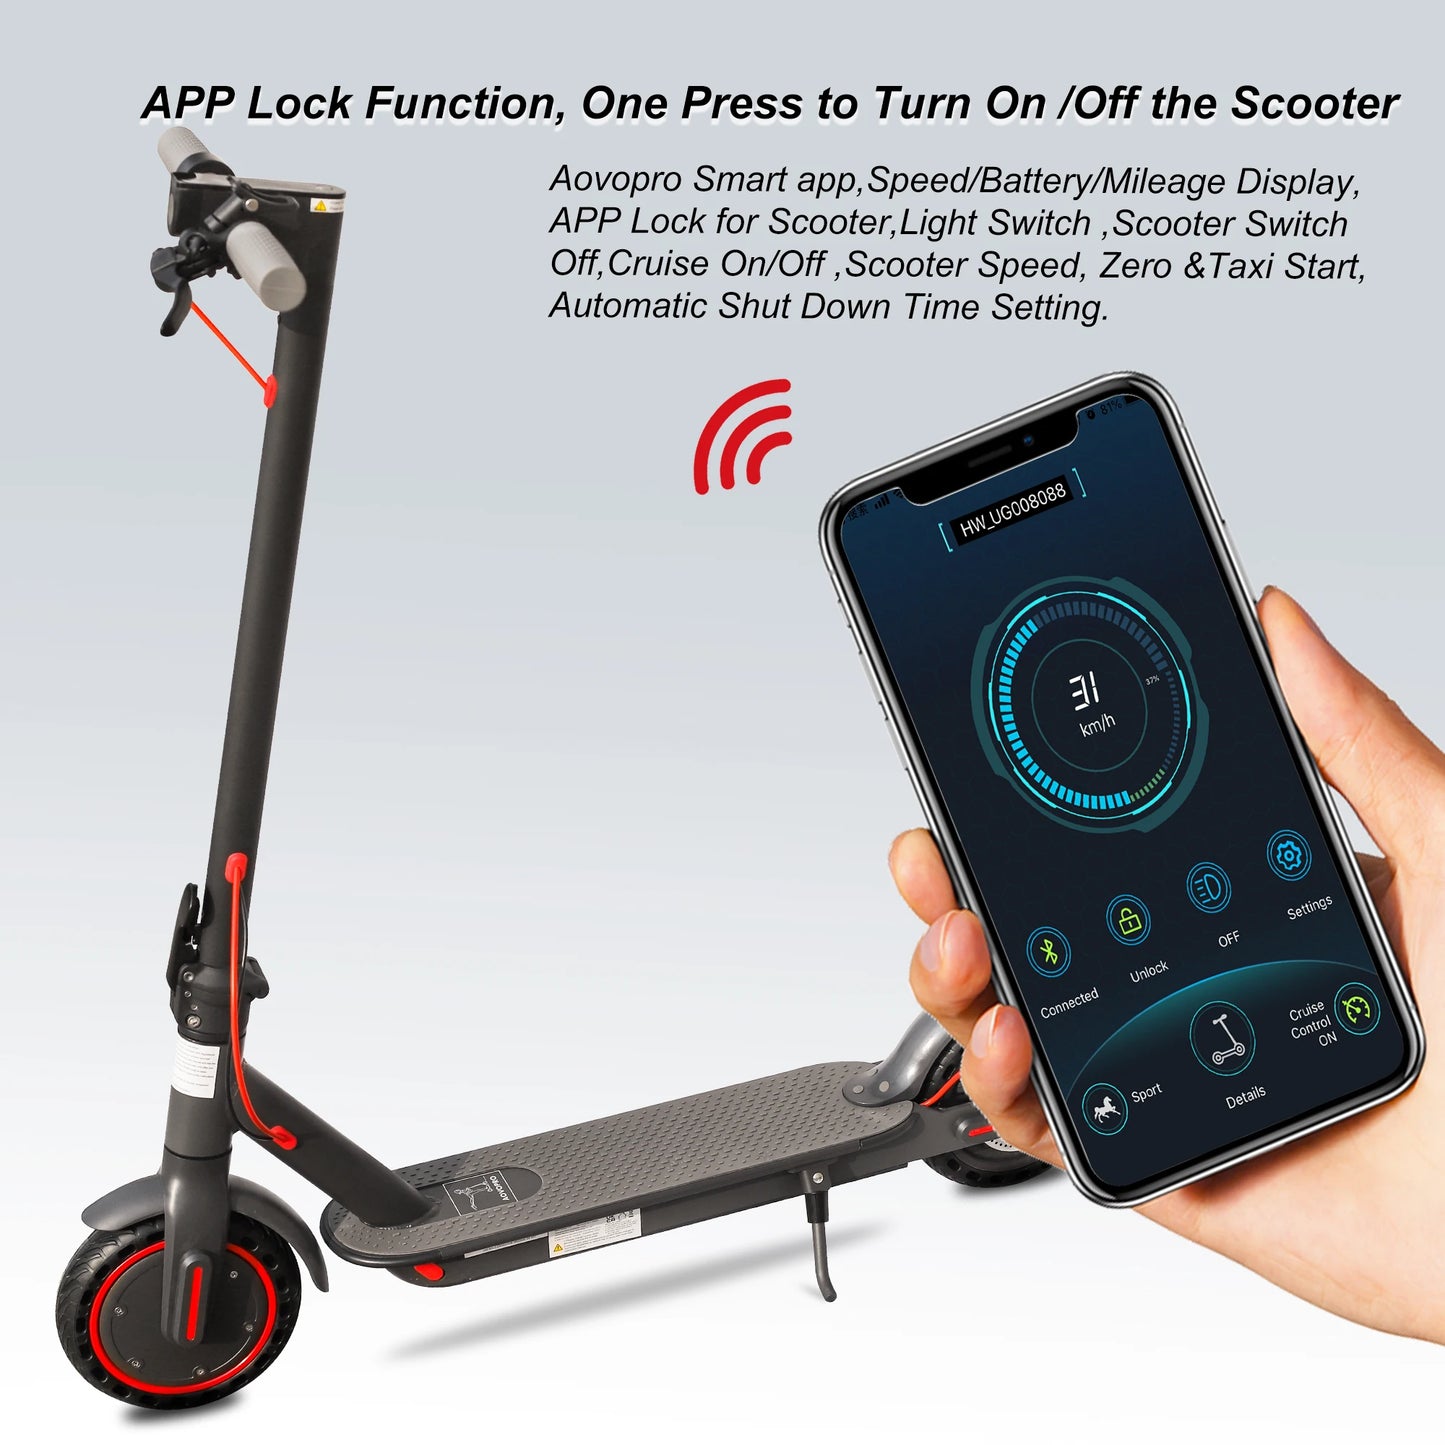 AOVOPRO ES80 Adult Electric Scooters 350W, 31km/h, Smart APP, Folding Scooter For Work, Aluminum Alloy, Long Battery Life